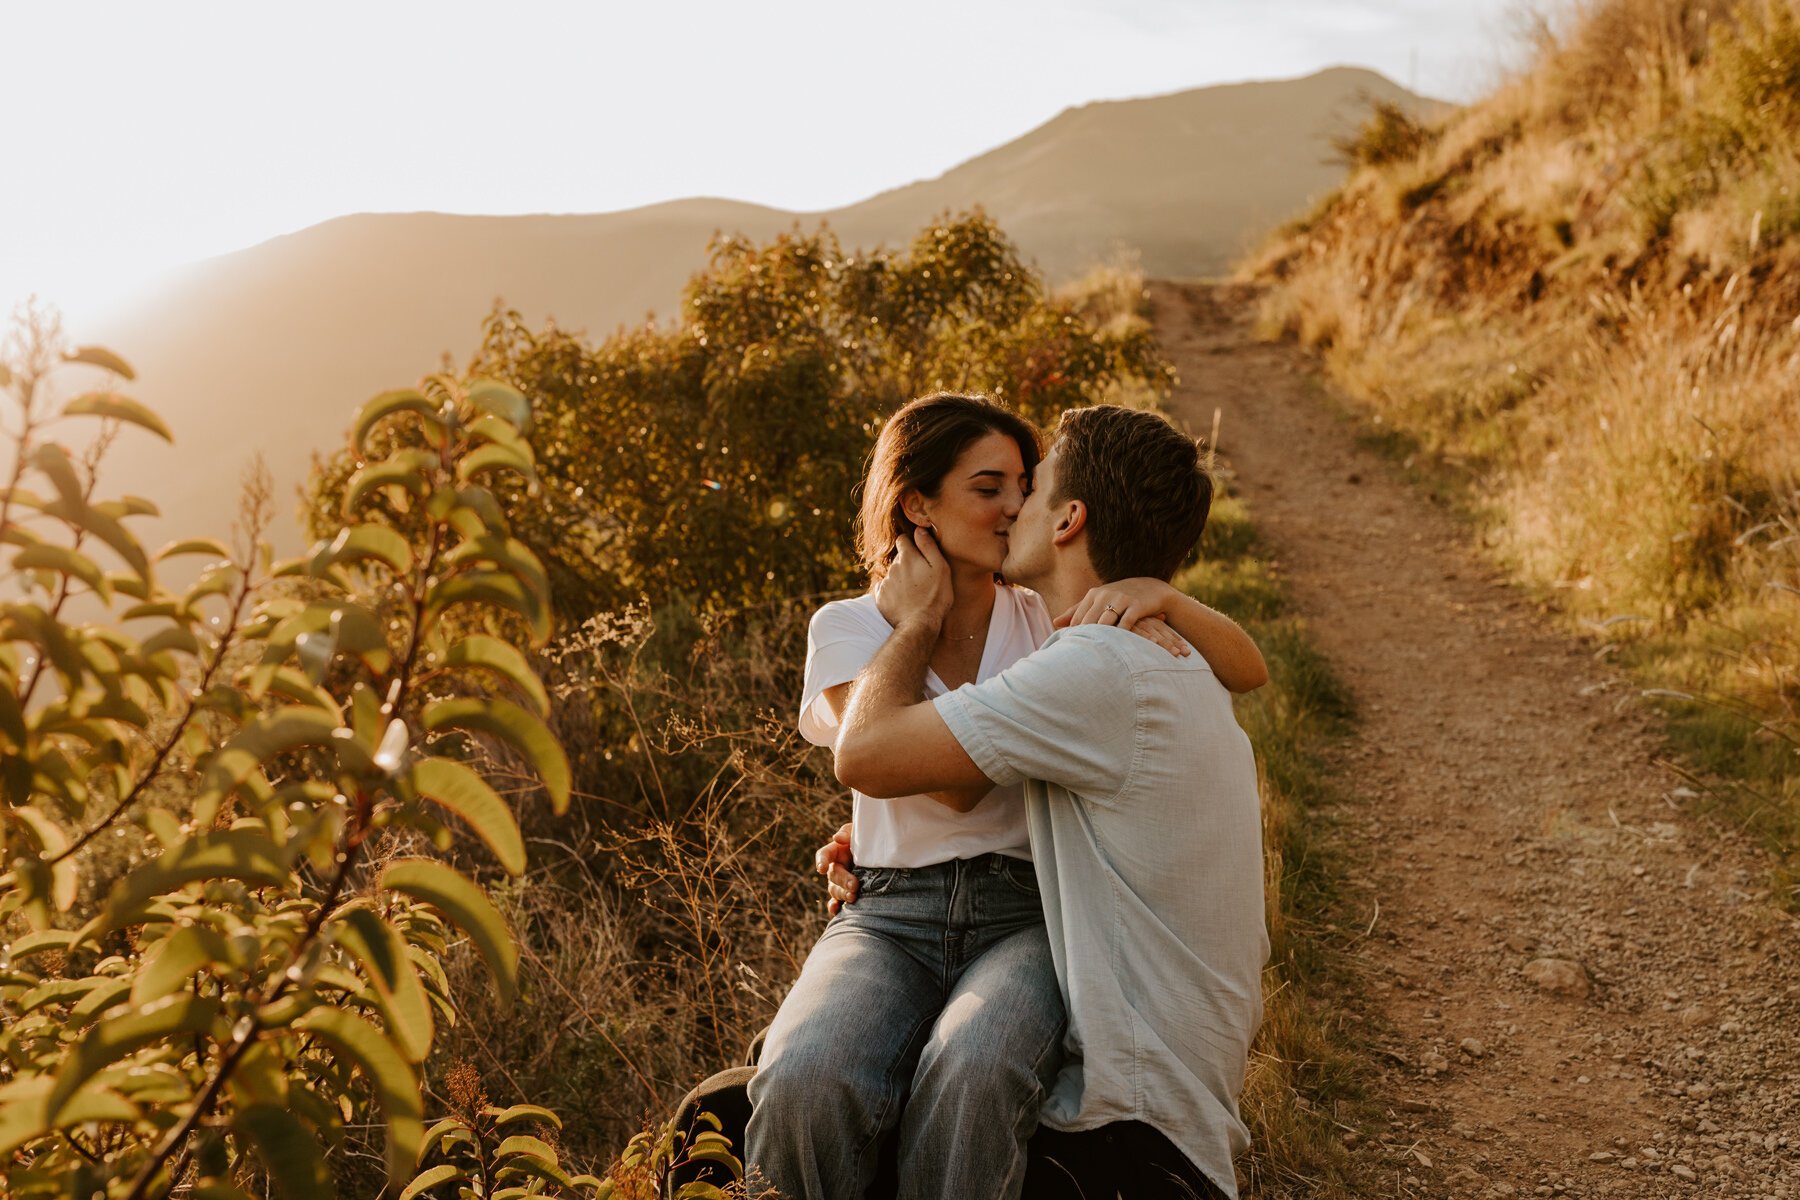 Solstice Canyon engagement session in Malibu, California | Photo by Tida Svy | www.tidasvy.com